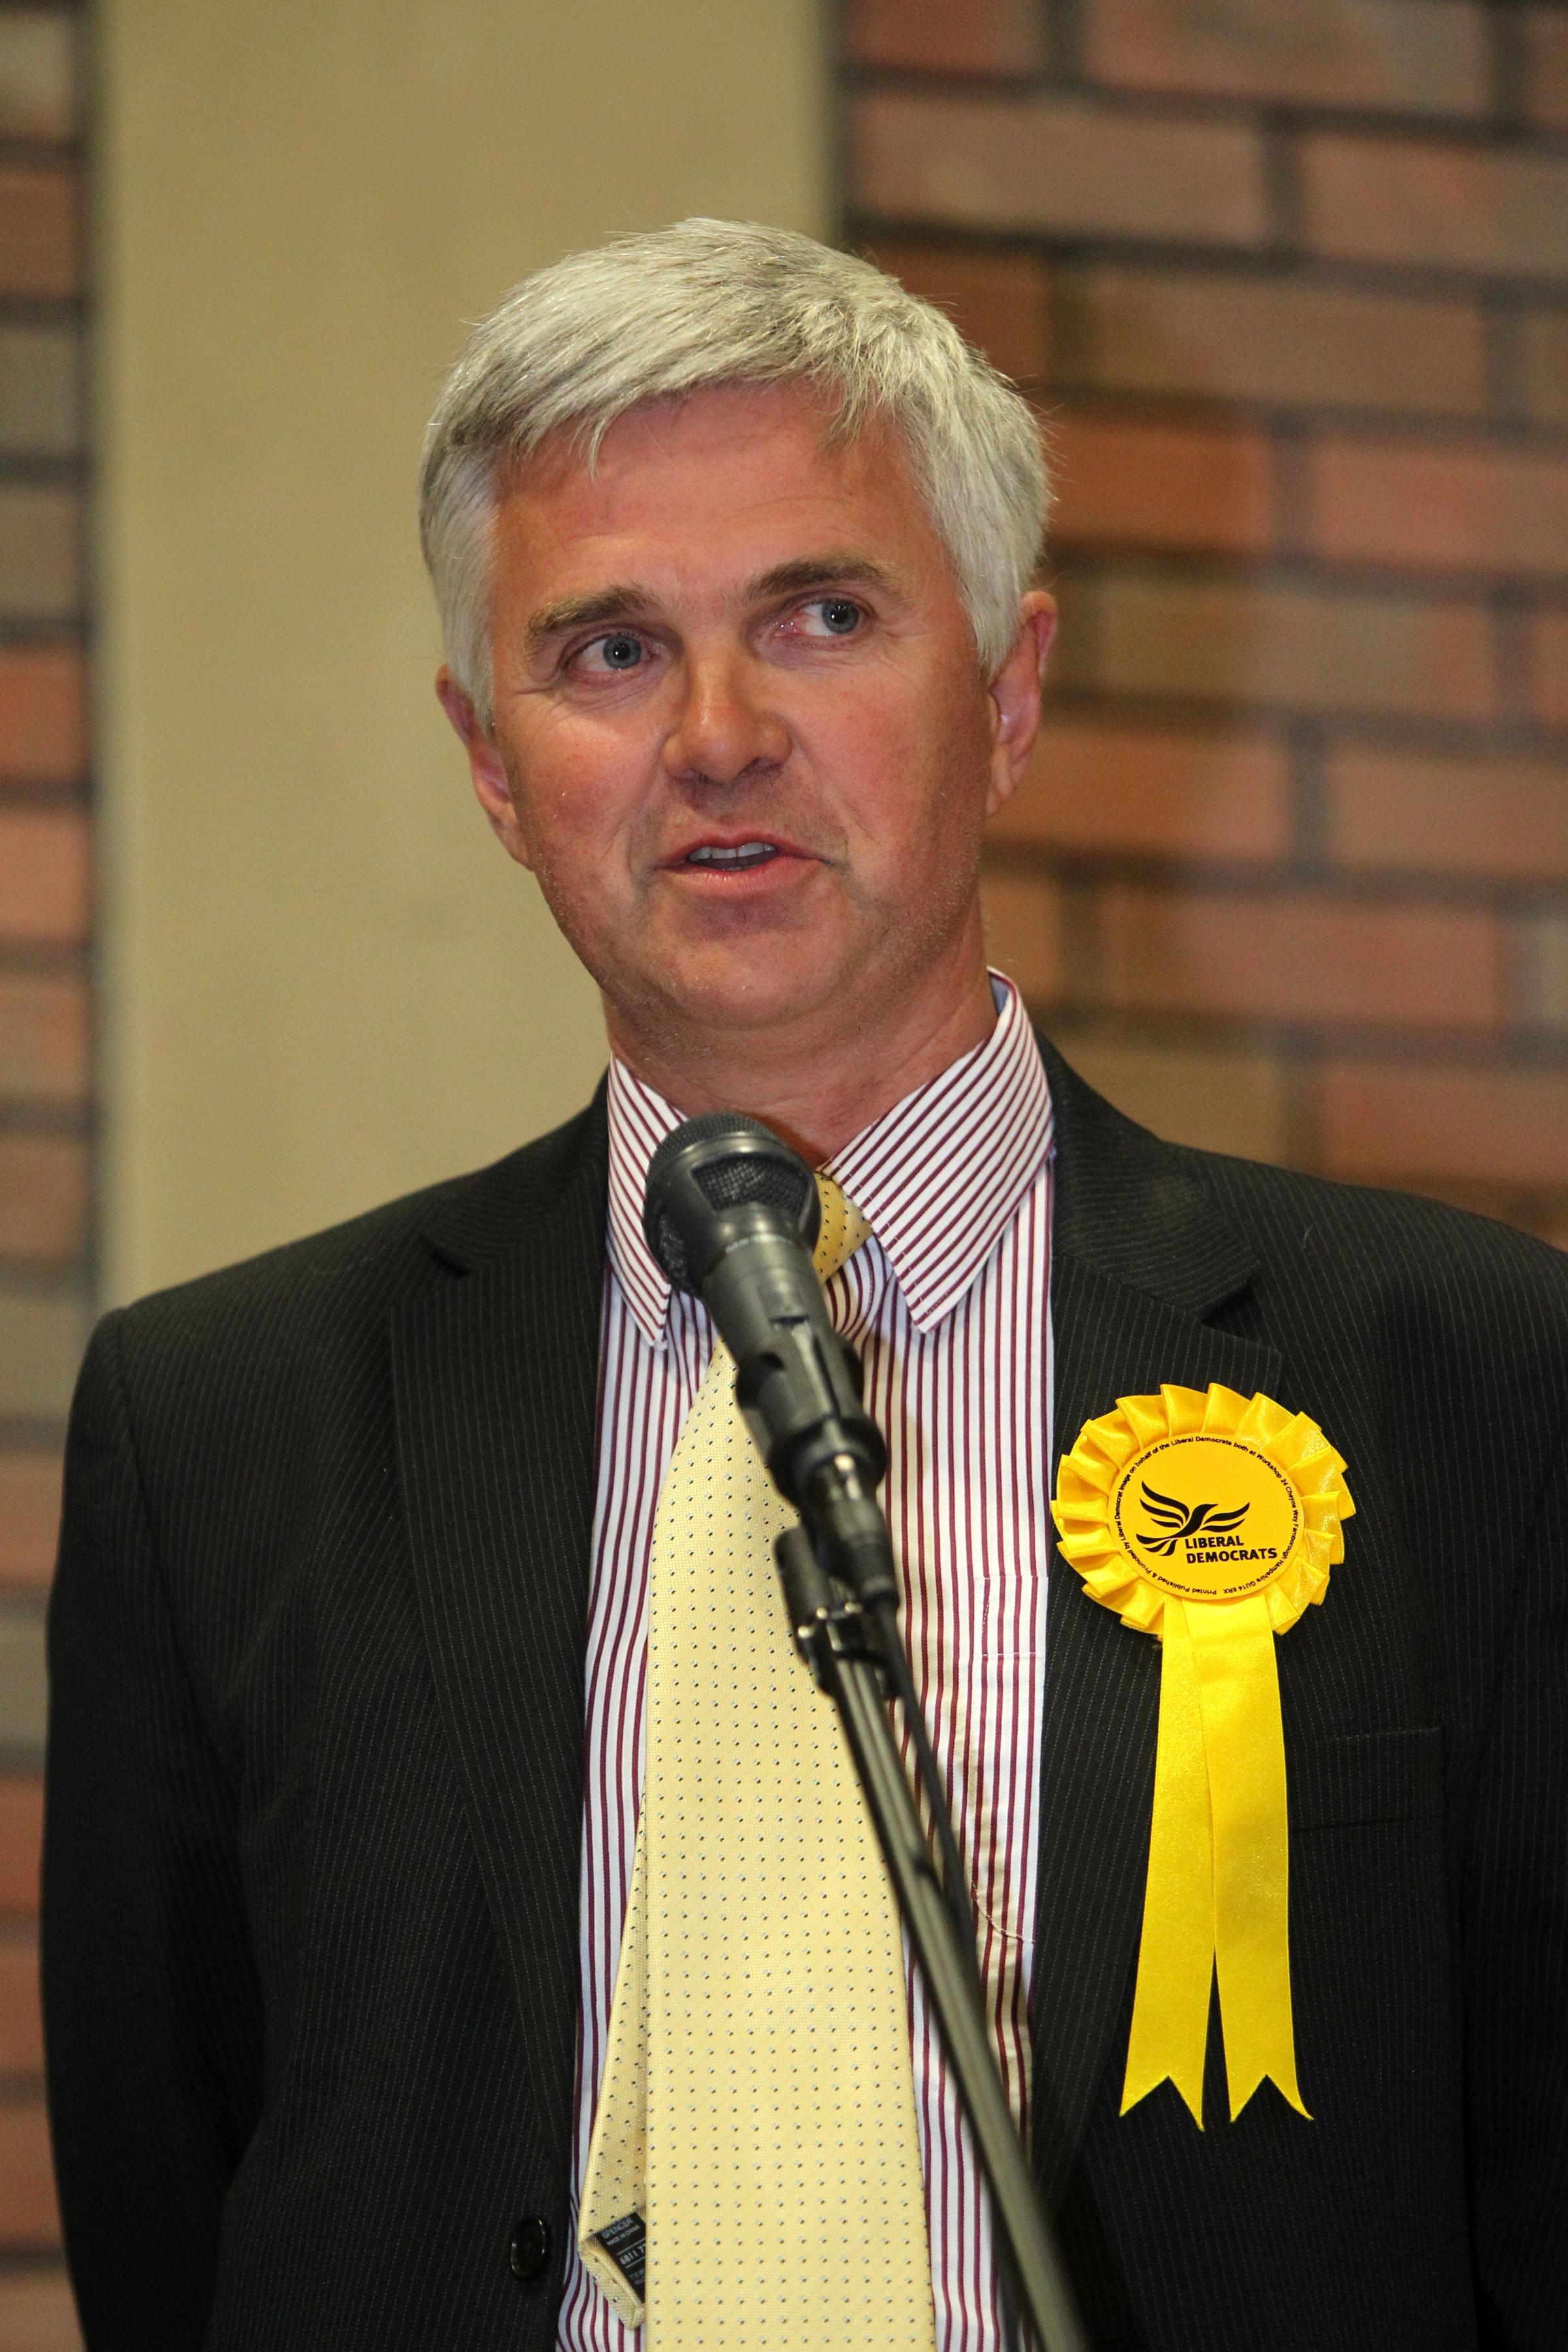 David Harrison won Totton South and Marchwood for the Lib-Dems, Hampshire County Council Elections, Applemore Leisure and Recreation Centre Thursday 2nd May 2013.